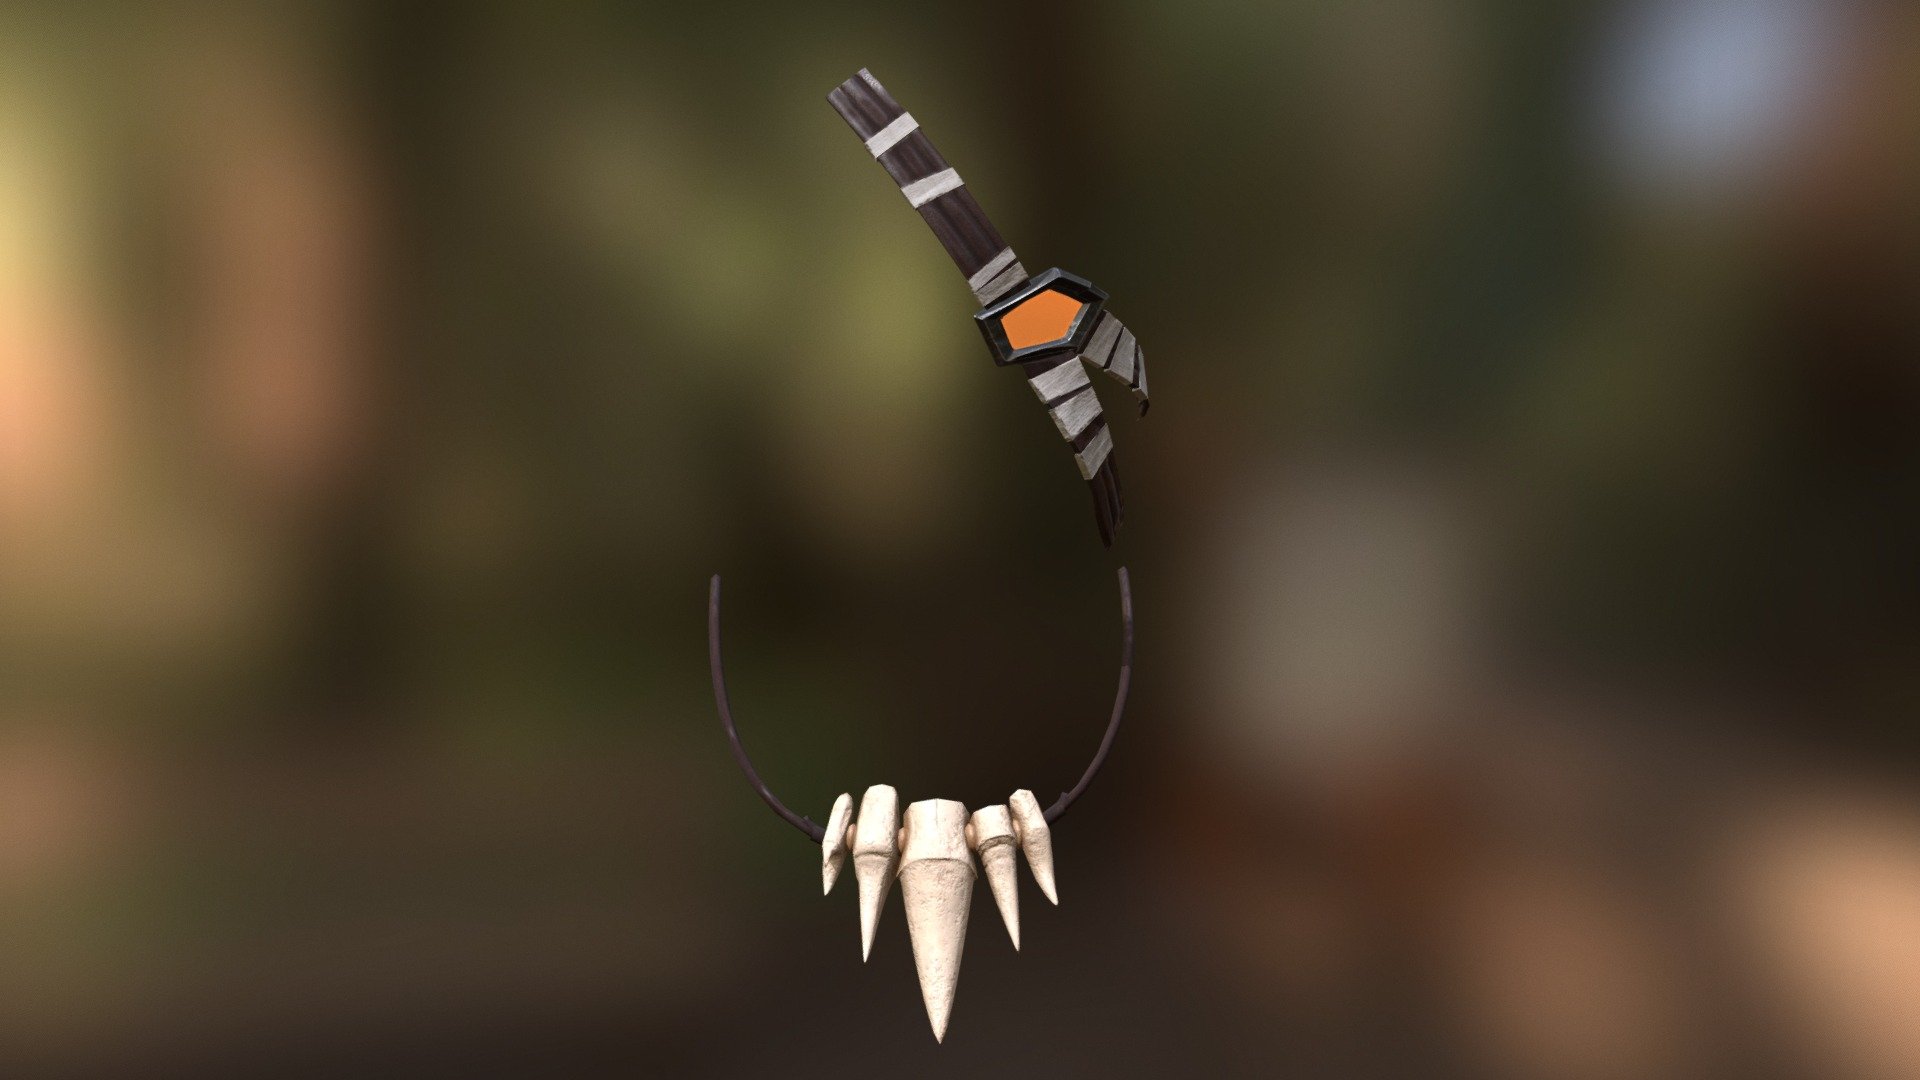 Patch and bone necklace model based on Rengar character from League of legends, made for instagram filter:
https://www.instagram.com/a/r/?effect_id=812753275873494 - Rengar Accessories - 3D model by alexnoiseless 3d model